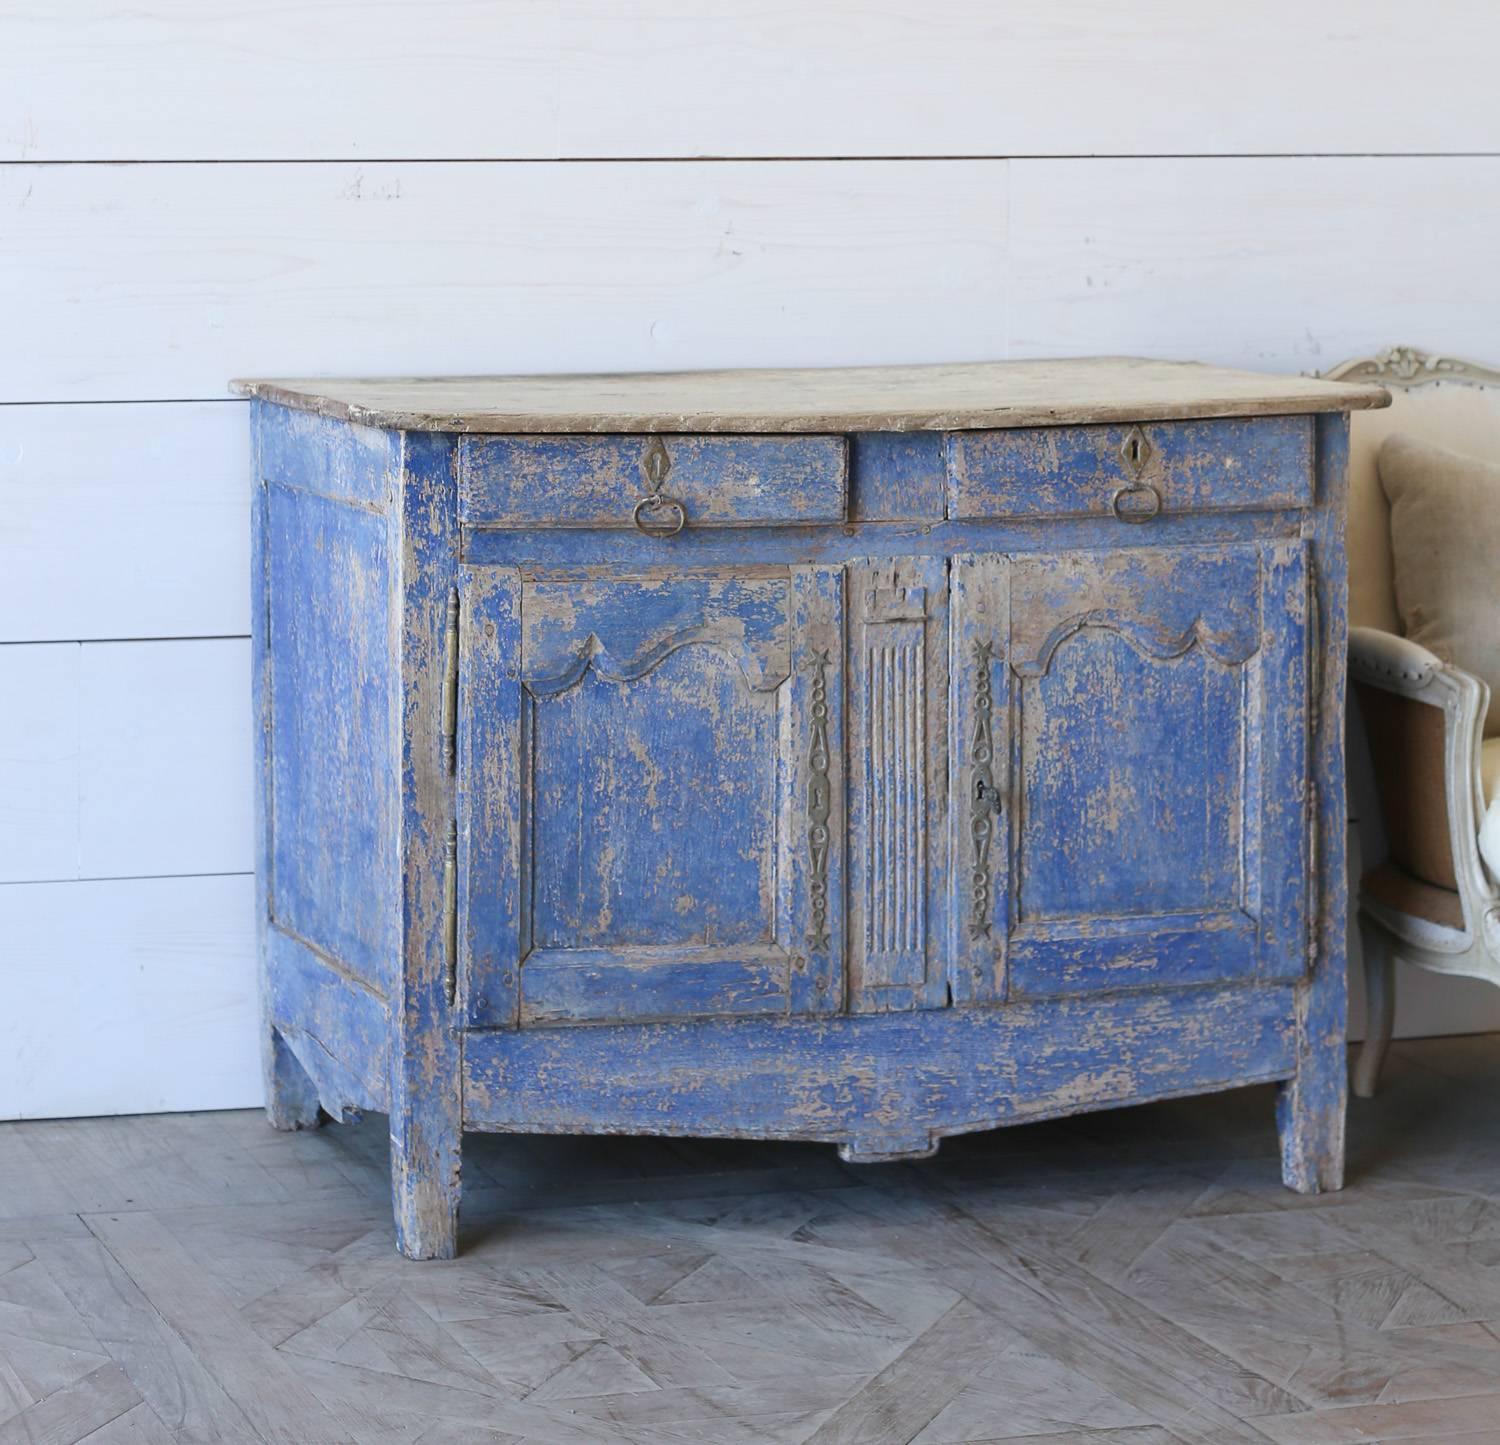 Provincial two-door cabinet in distressed cobalt blue finish revealing old French oak. Top has gorgeous patina of peach and wood paired back to charming antique hardware. A unique piece to brighten any room.